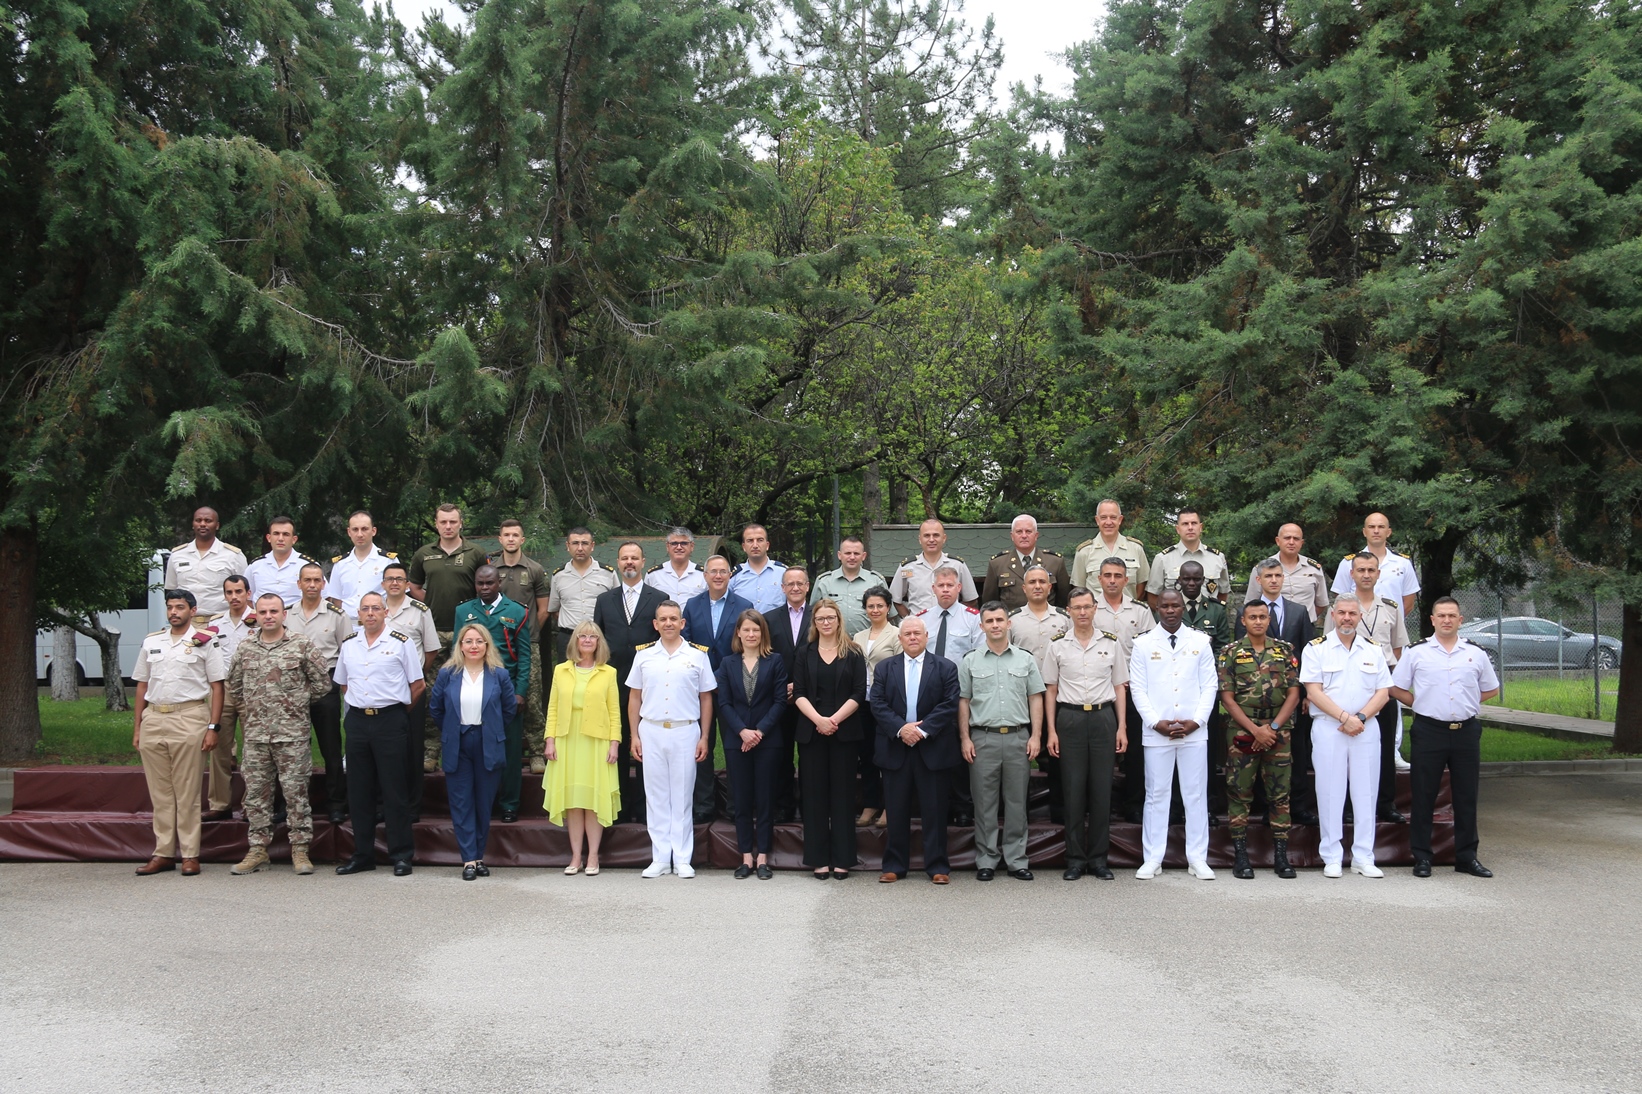 Basic Critical Infrastructure Security and Resilience Against Terrorist Attacks Course was held between 19-22 June 2023 with the participation of 9 speakers from 3 countries, 35 participants from 13 countries.